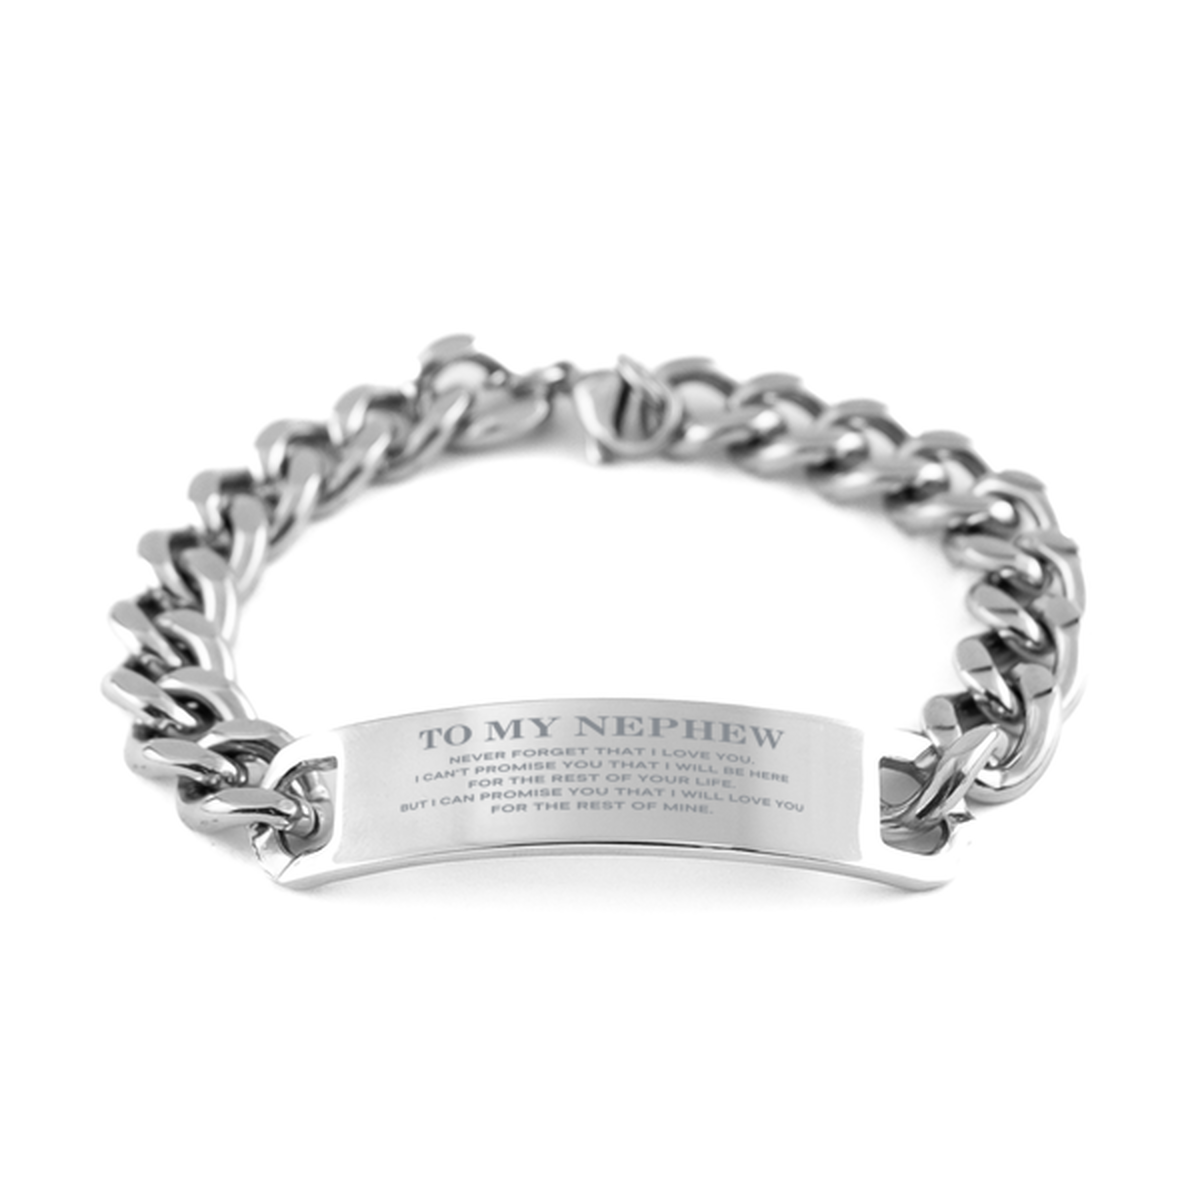 To My Nephew Gifts, I will love you for the rest of mine, Love Nephew Bracelet, Birthday Christmas Unique Cuban Chain Stainless Steel Bracelet For Nephew